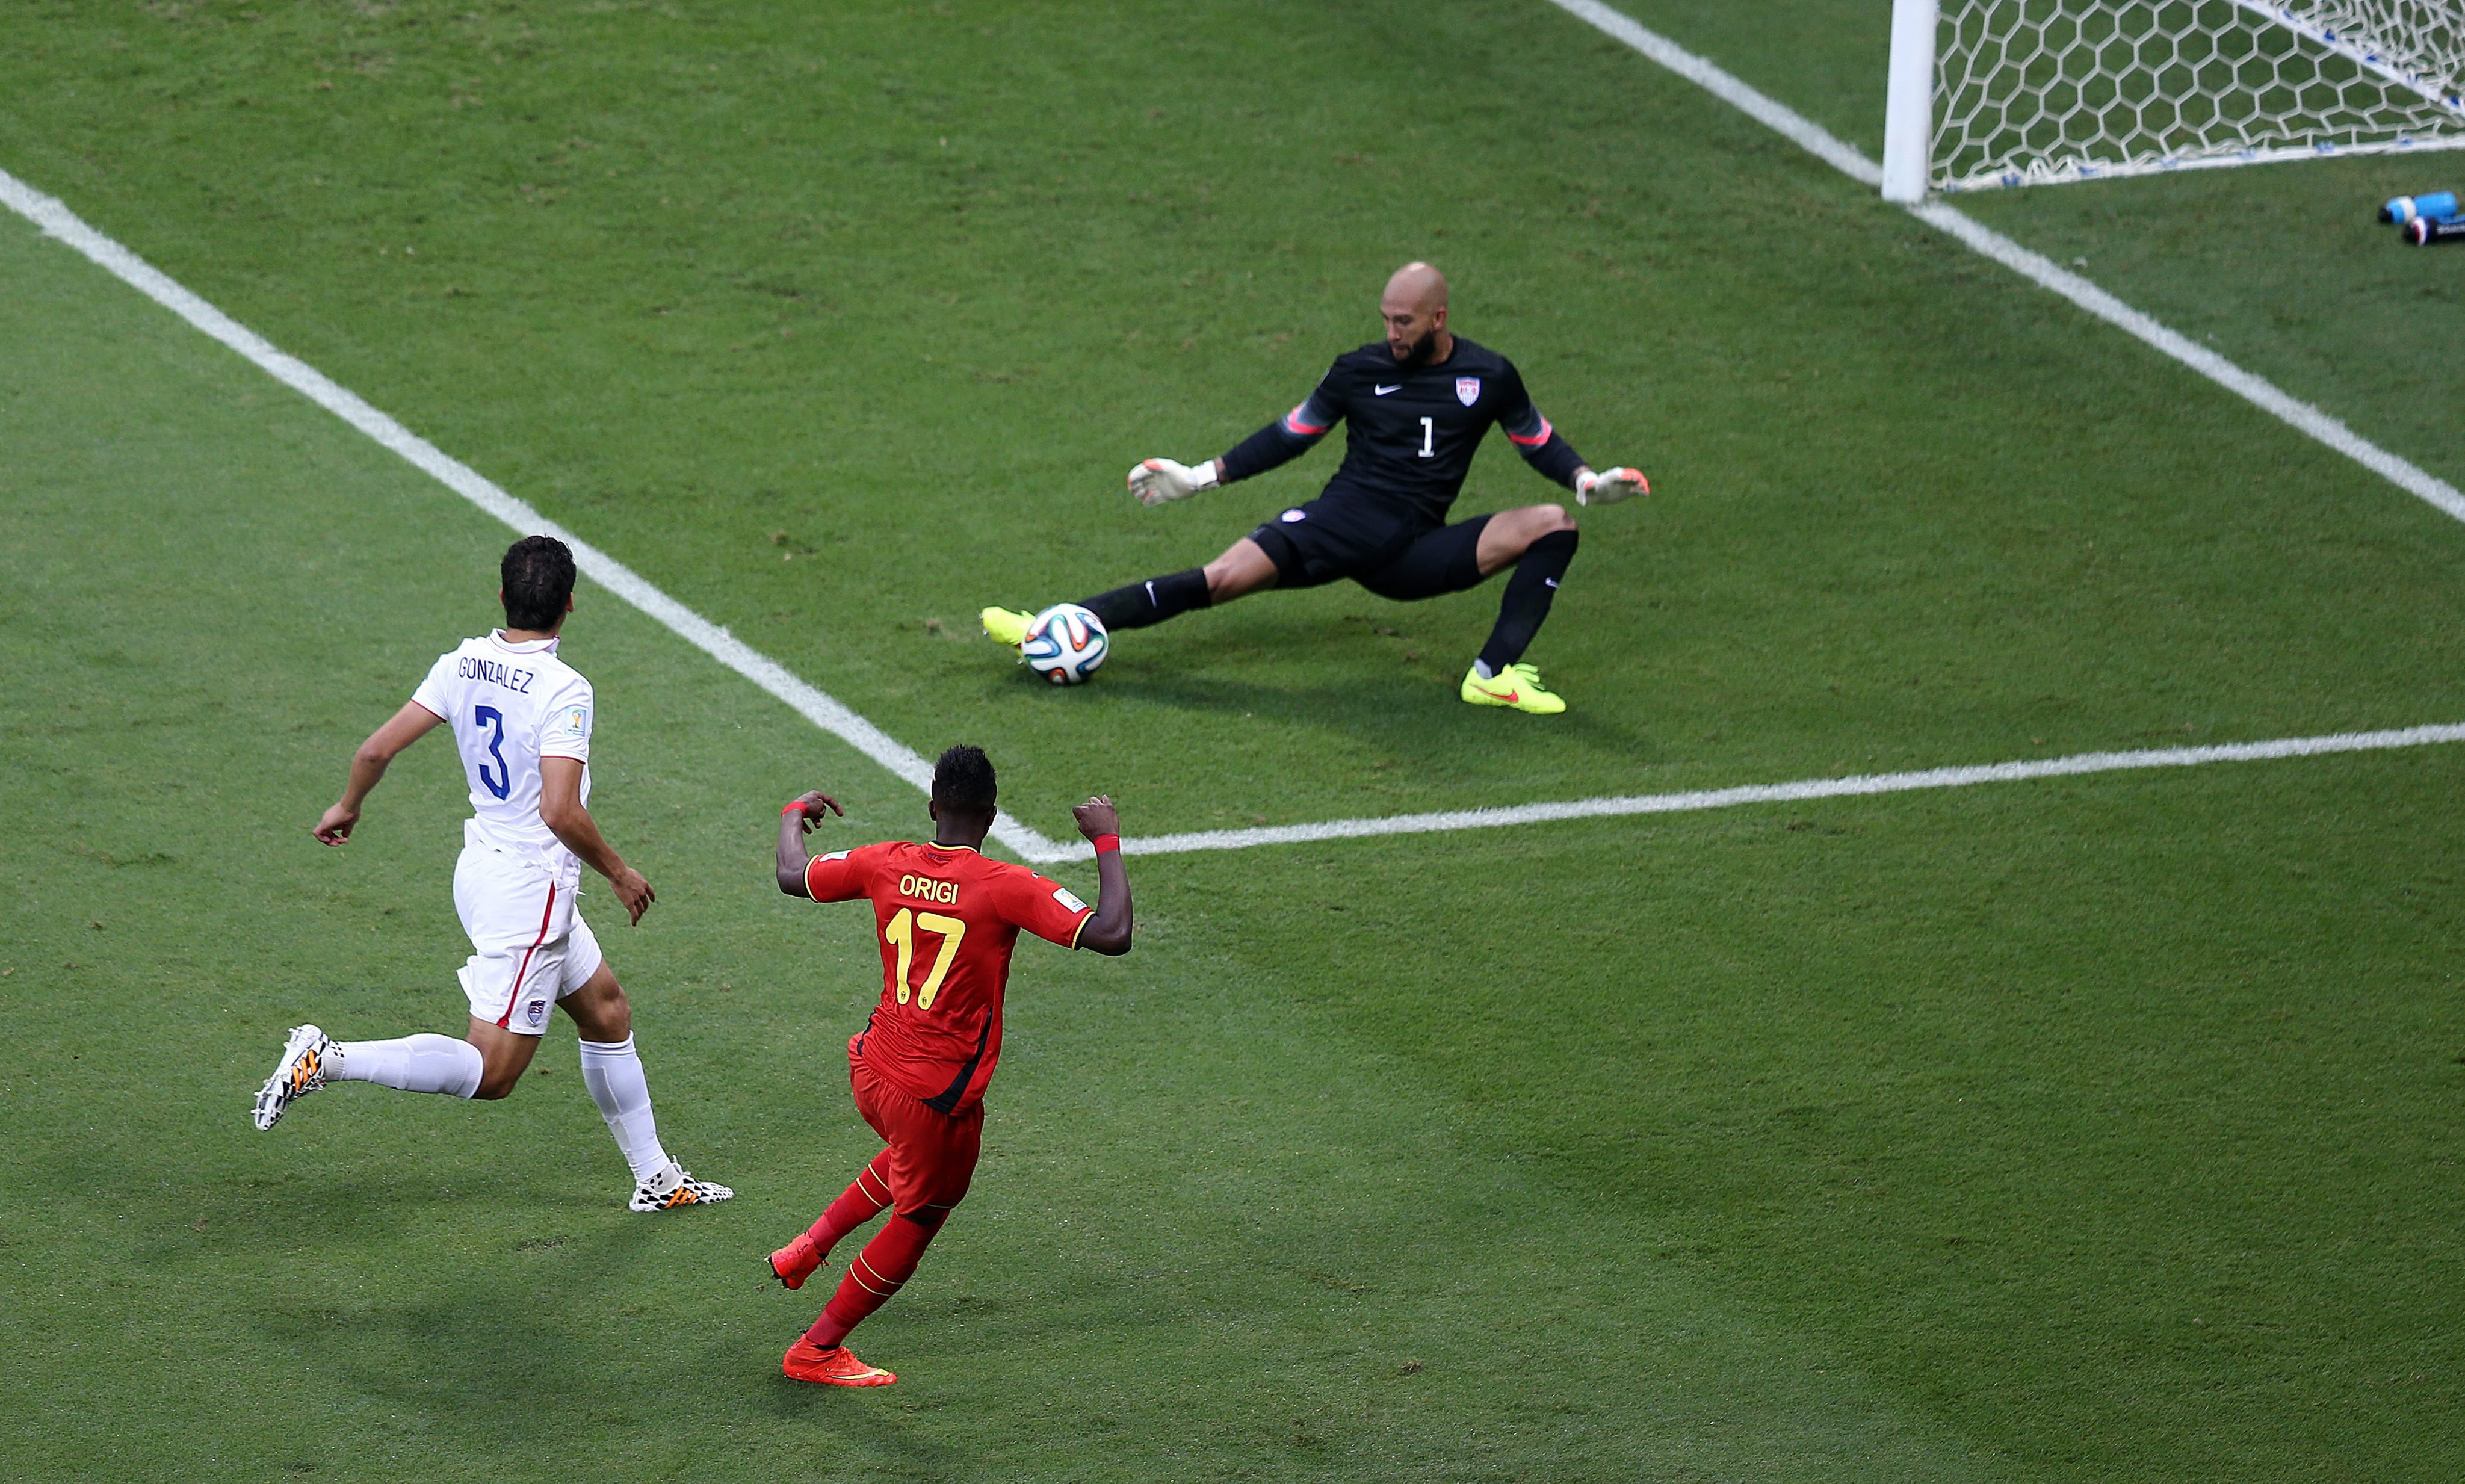 Goalkeeper Tim Howard of the USA saves a shot during the FIFA World Cup 2014 round of 16 match between Belgium and the USA at the Arena Fonte Nova in Salvador, Brazil on July 1, 2014.